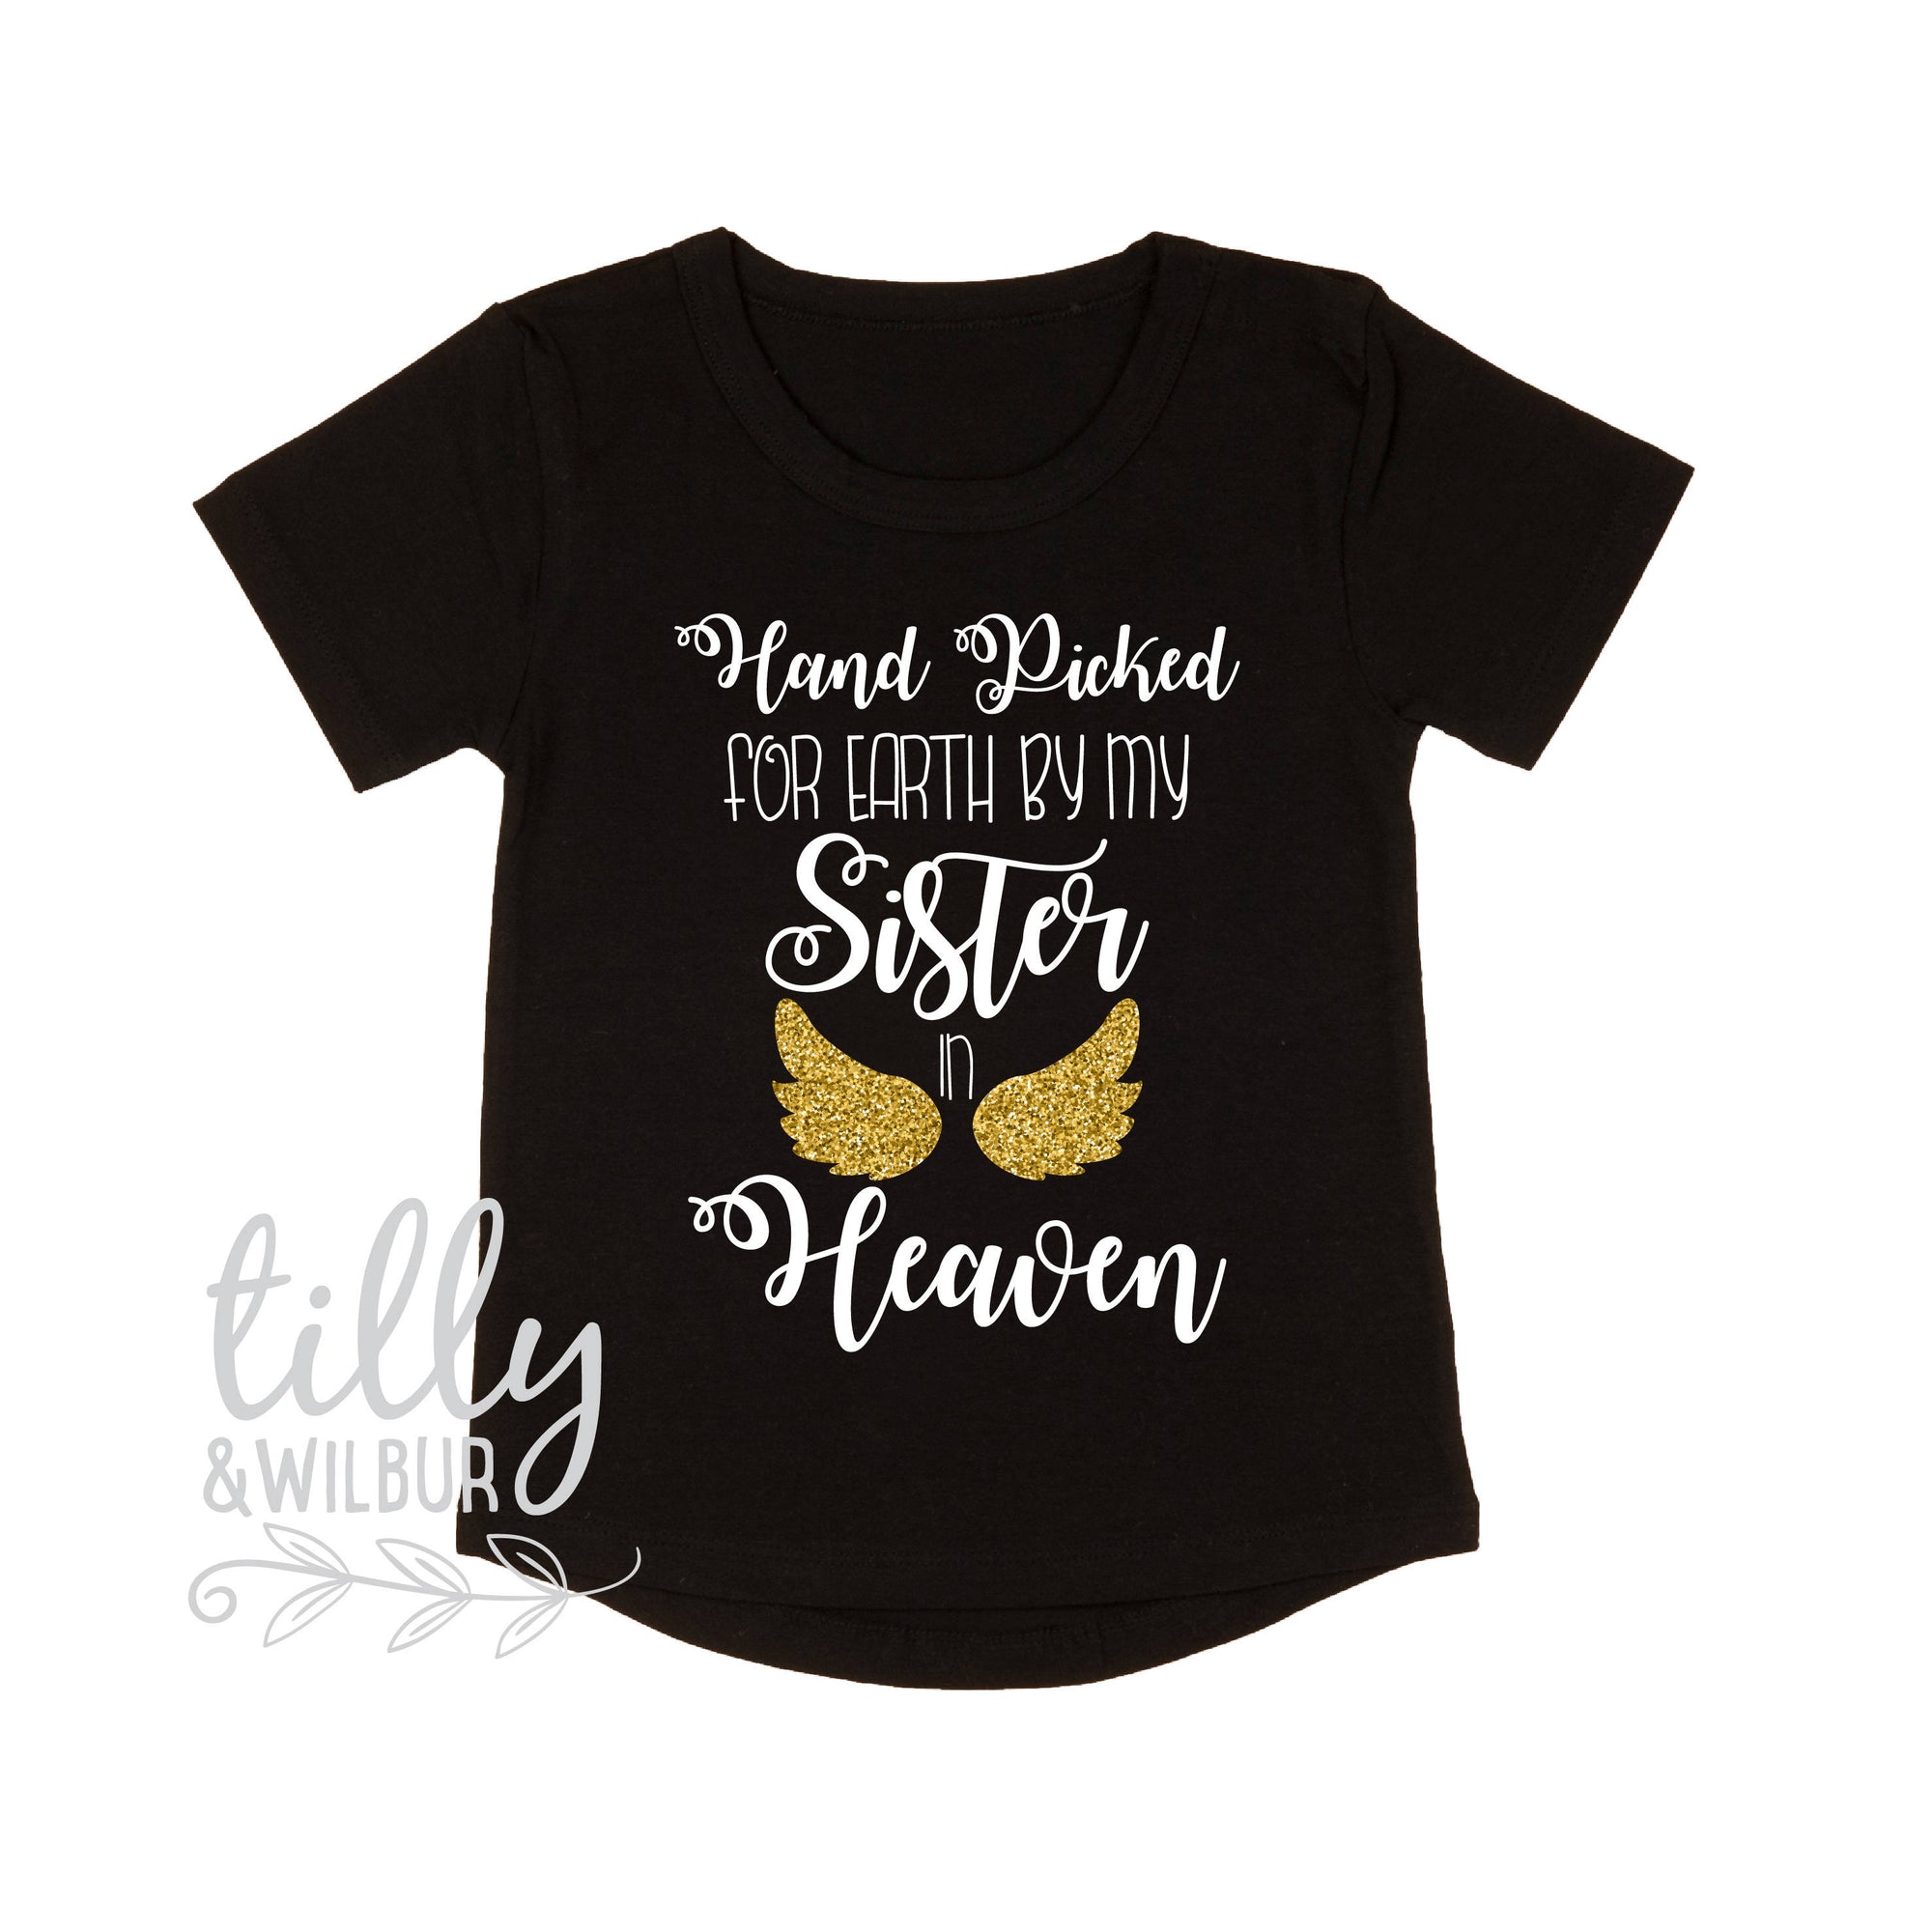 Handpicked For Earth By My Sister Grandma Grandpa Brother In Heaven Baby Bodysuit Or Shirt, Handpicked For Earth Shirt, Heaven Baby